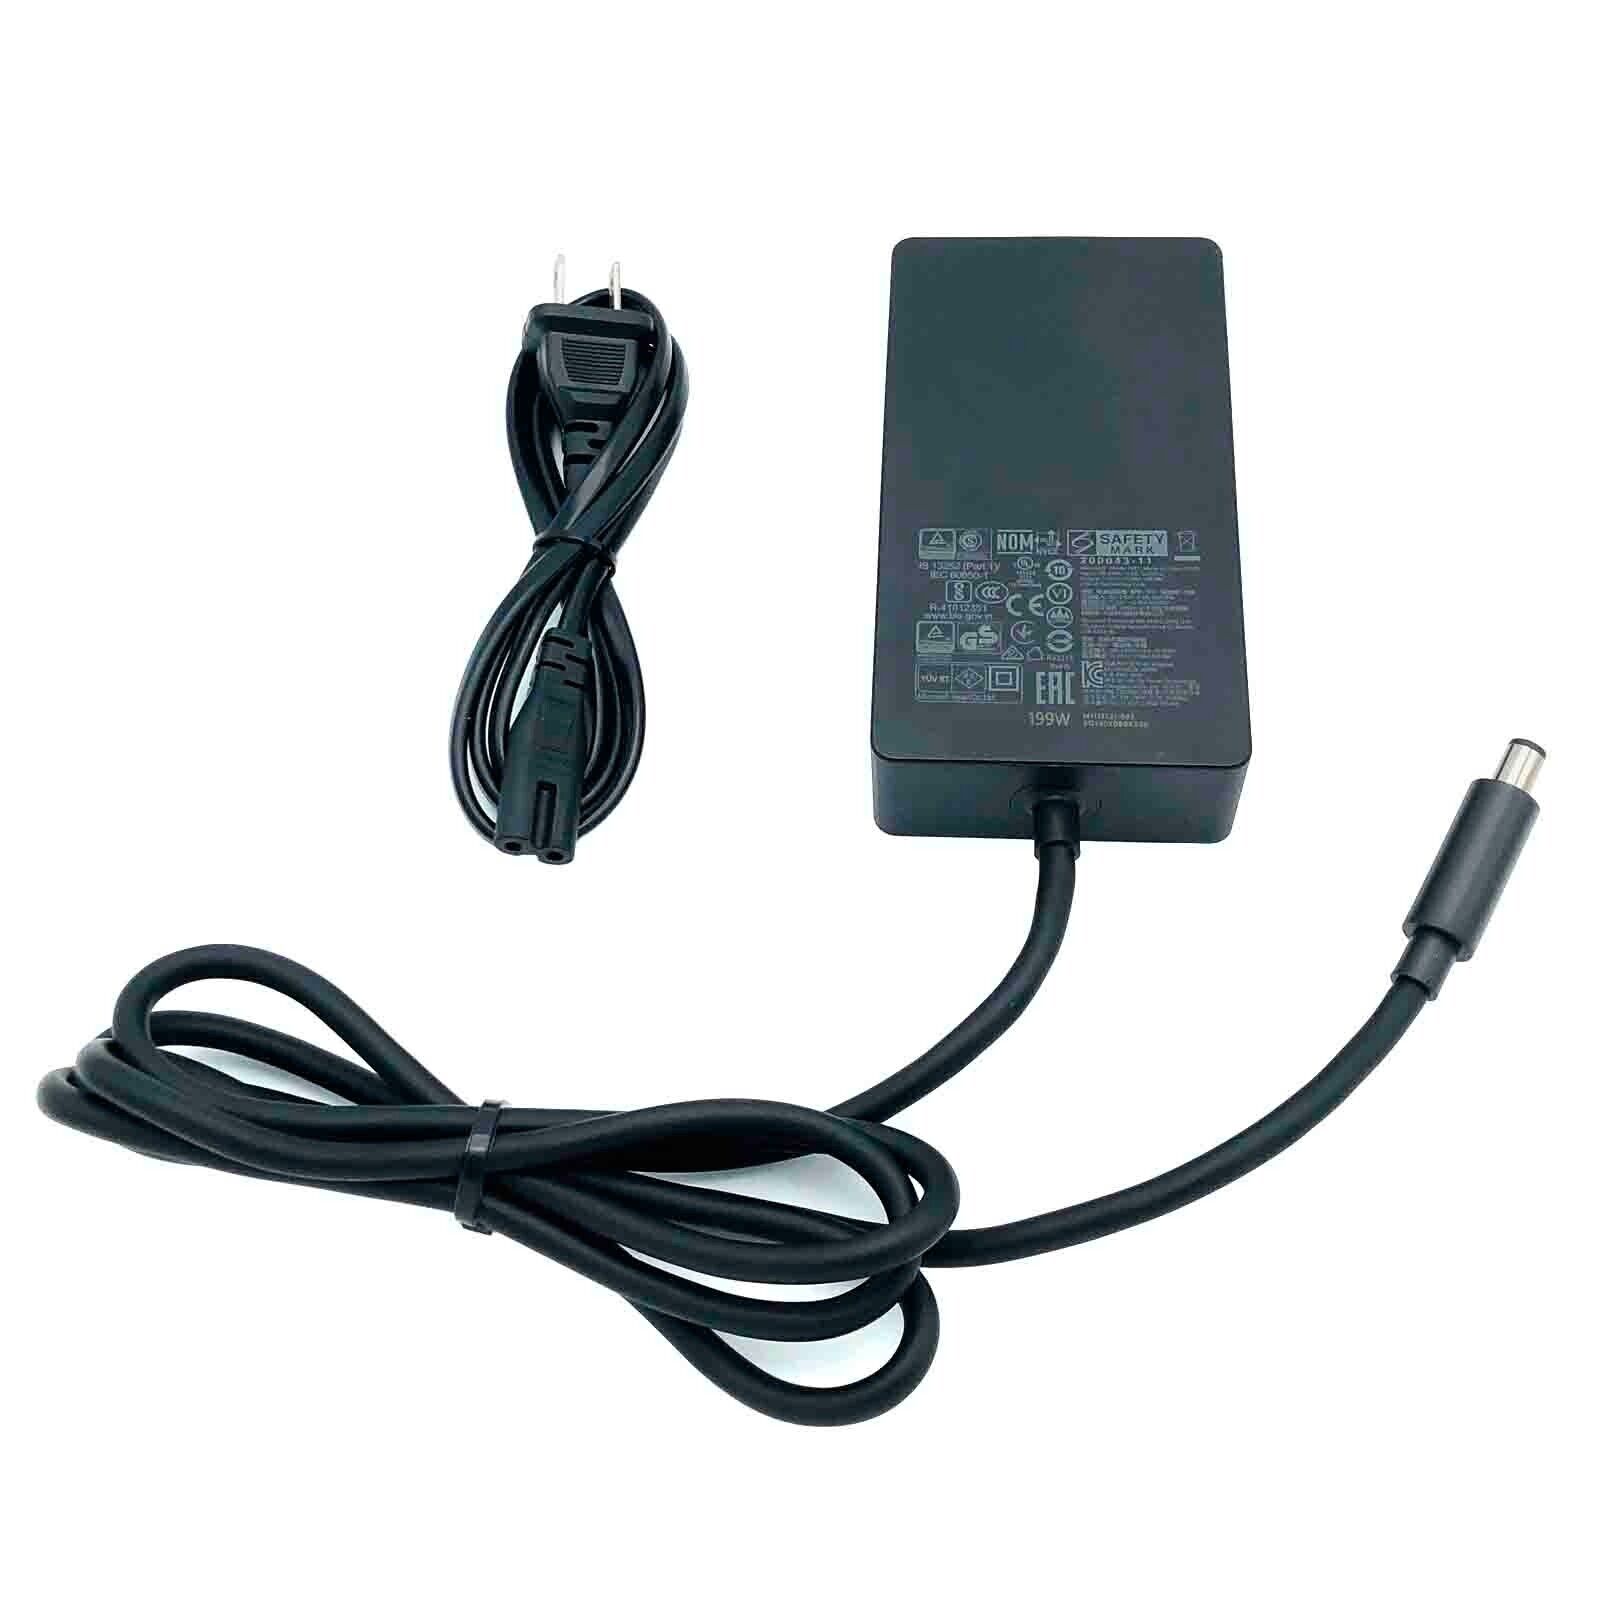 Genuine 199W Microsoft AC Adapter for Surface Dock Charger 2 Model 1917 w/Cord